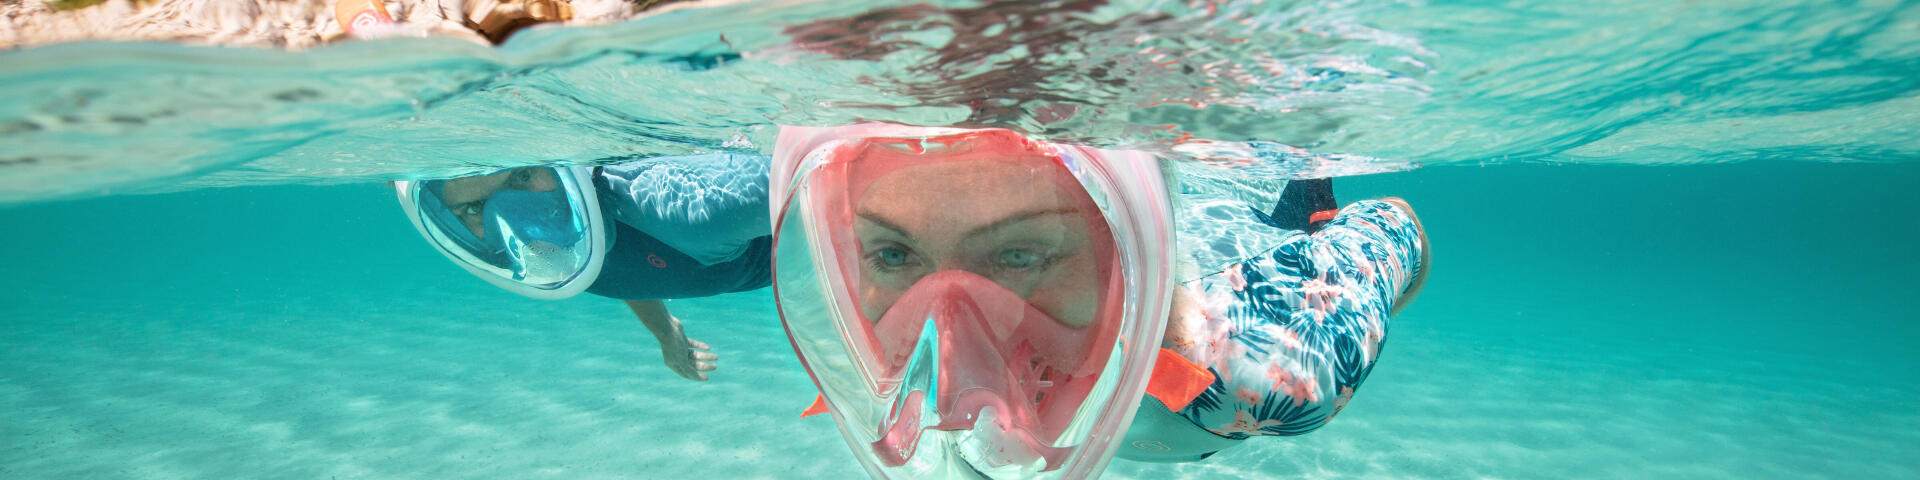 Snorkeling safety rules